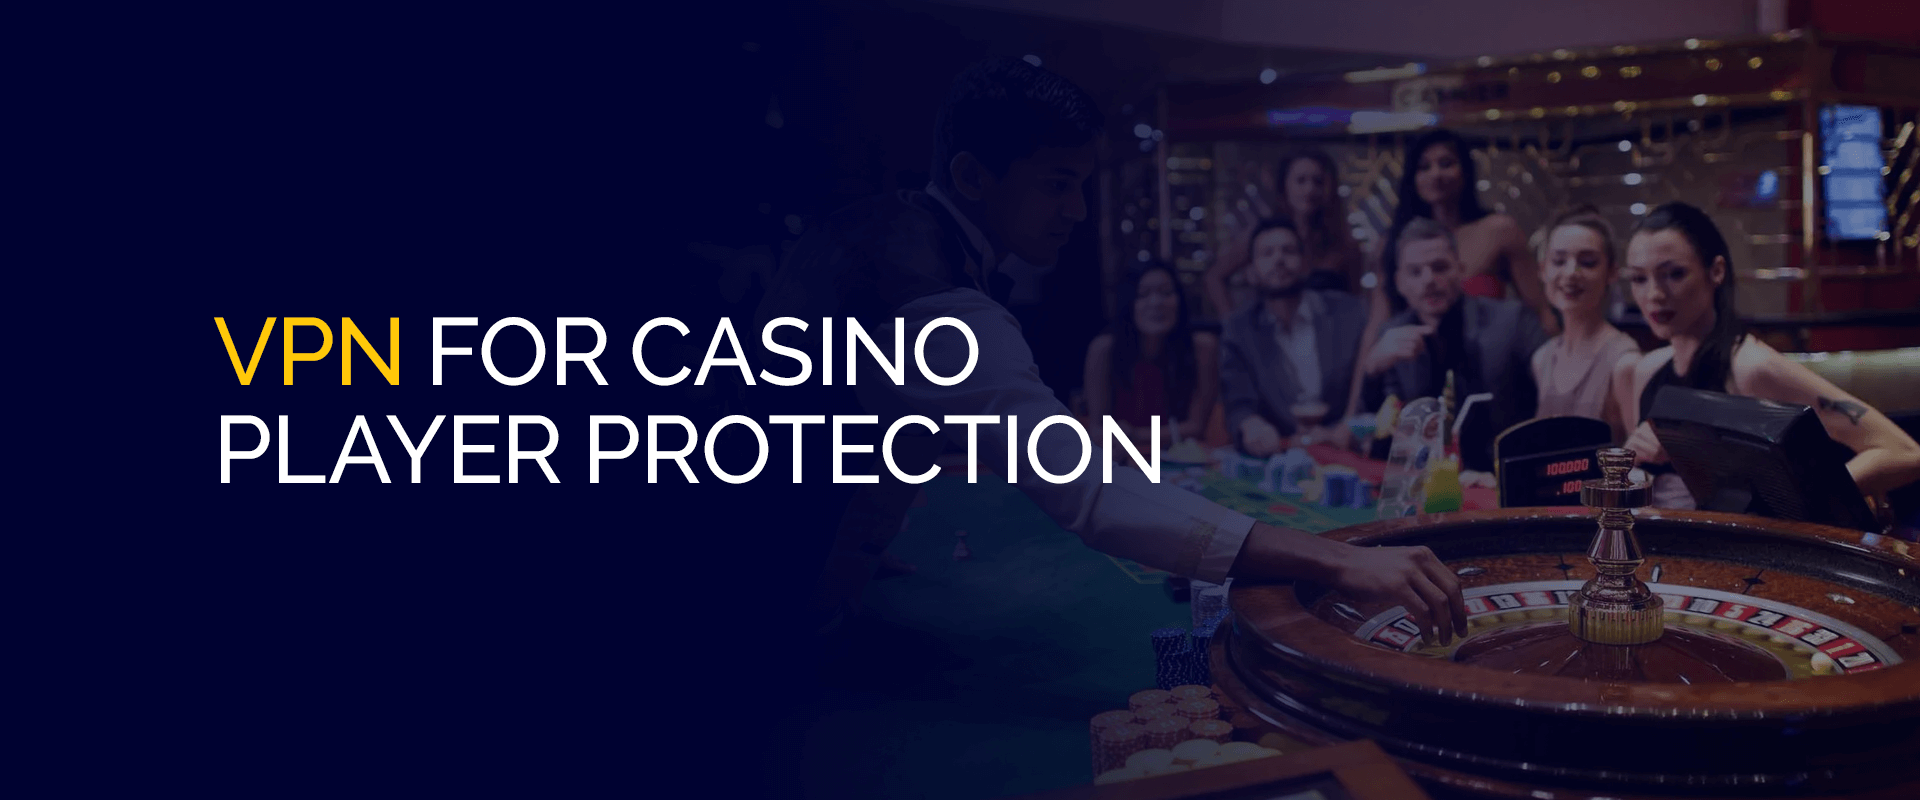 VPN for Casino Player Protection